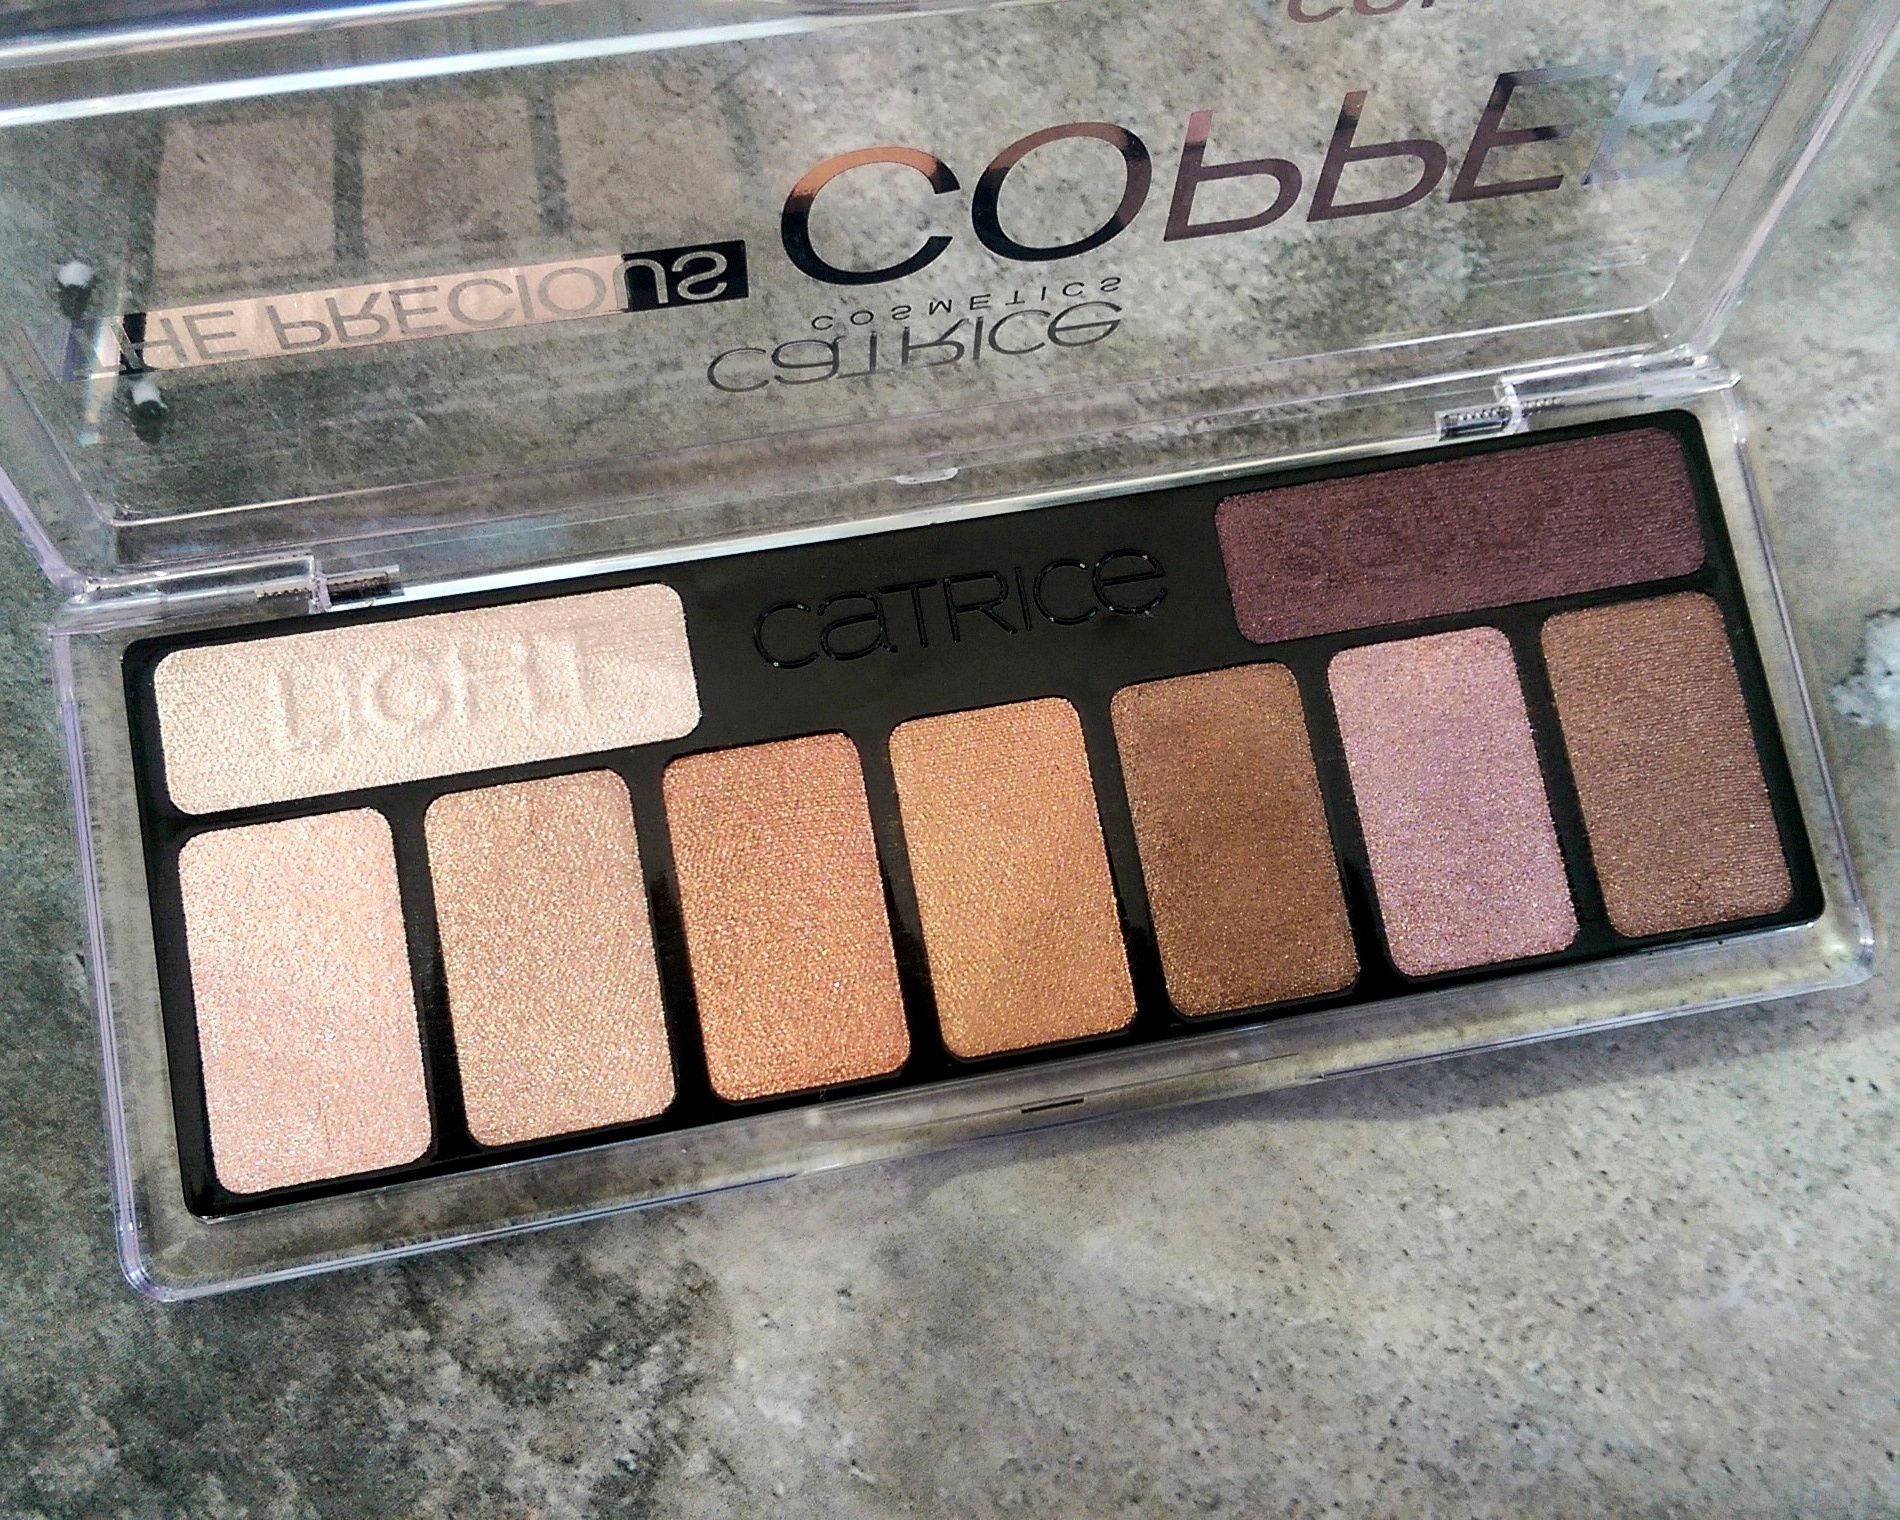 my Review: Life Catrice shadow palette The – eye Copper Precious Lipgloss is